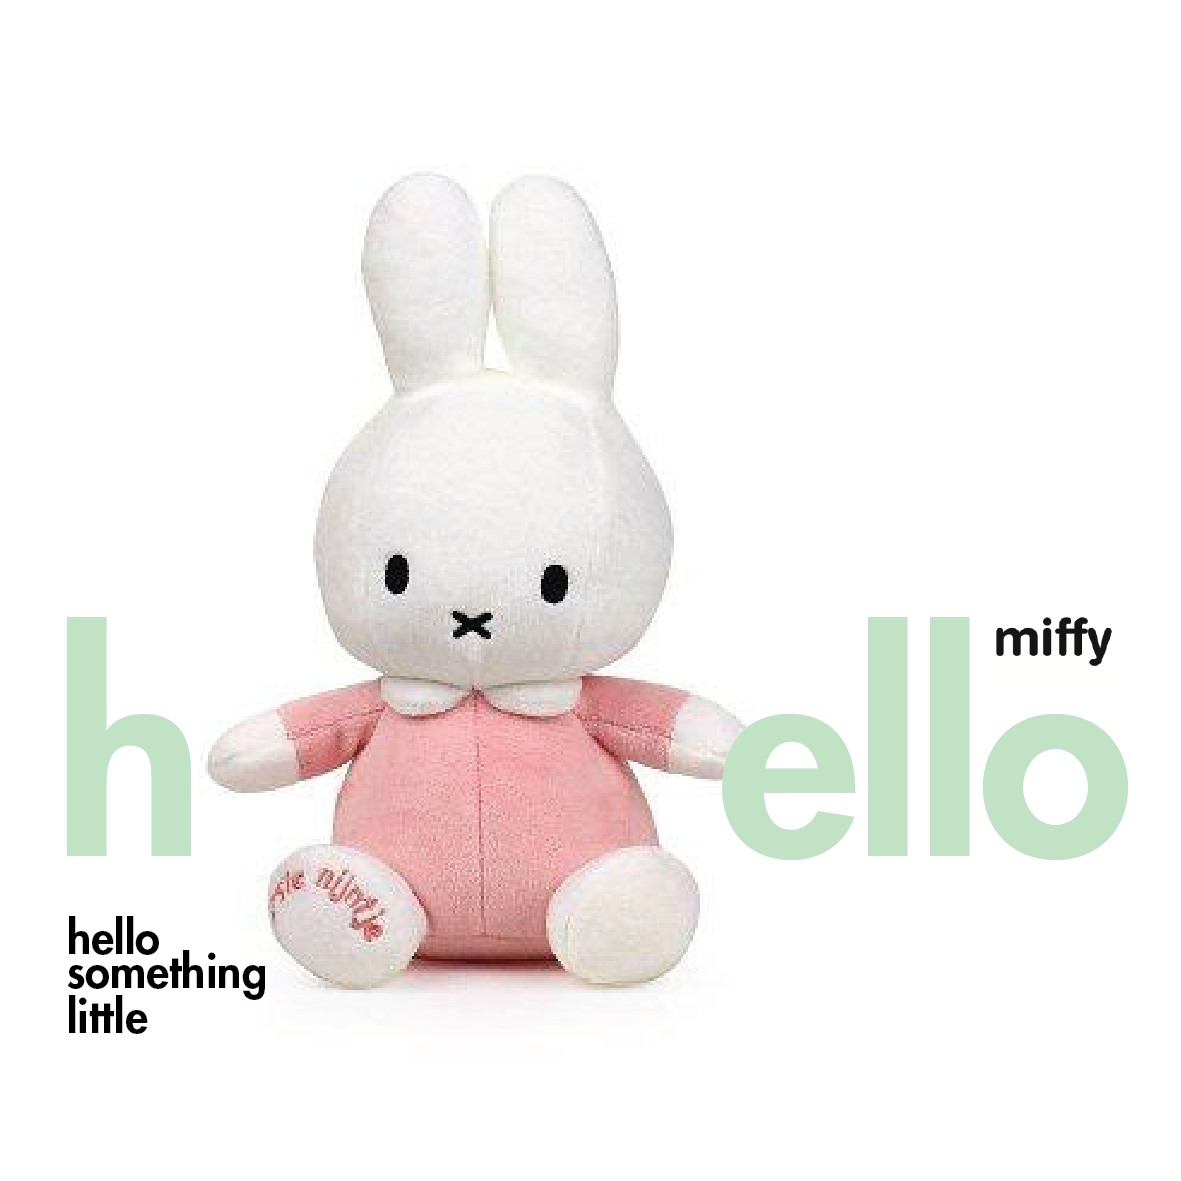 My first Miffy girl